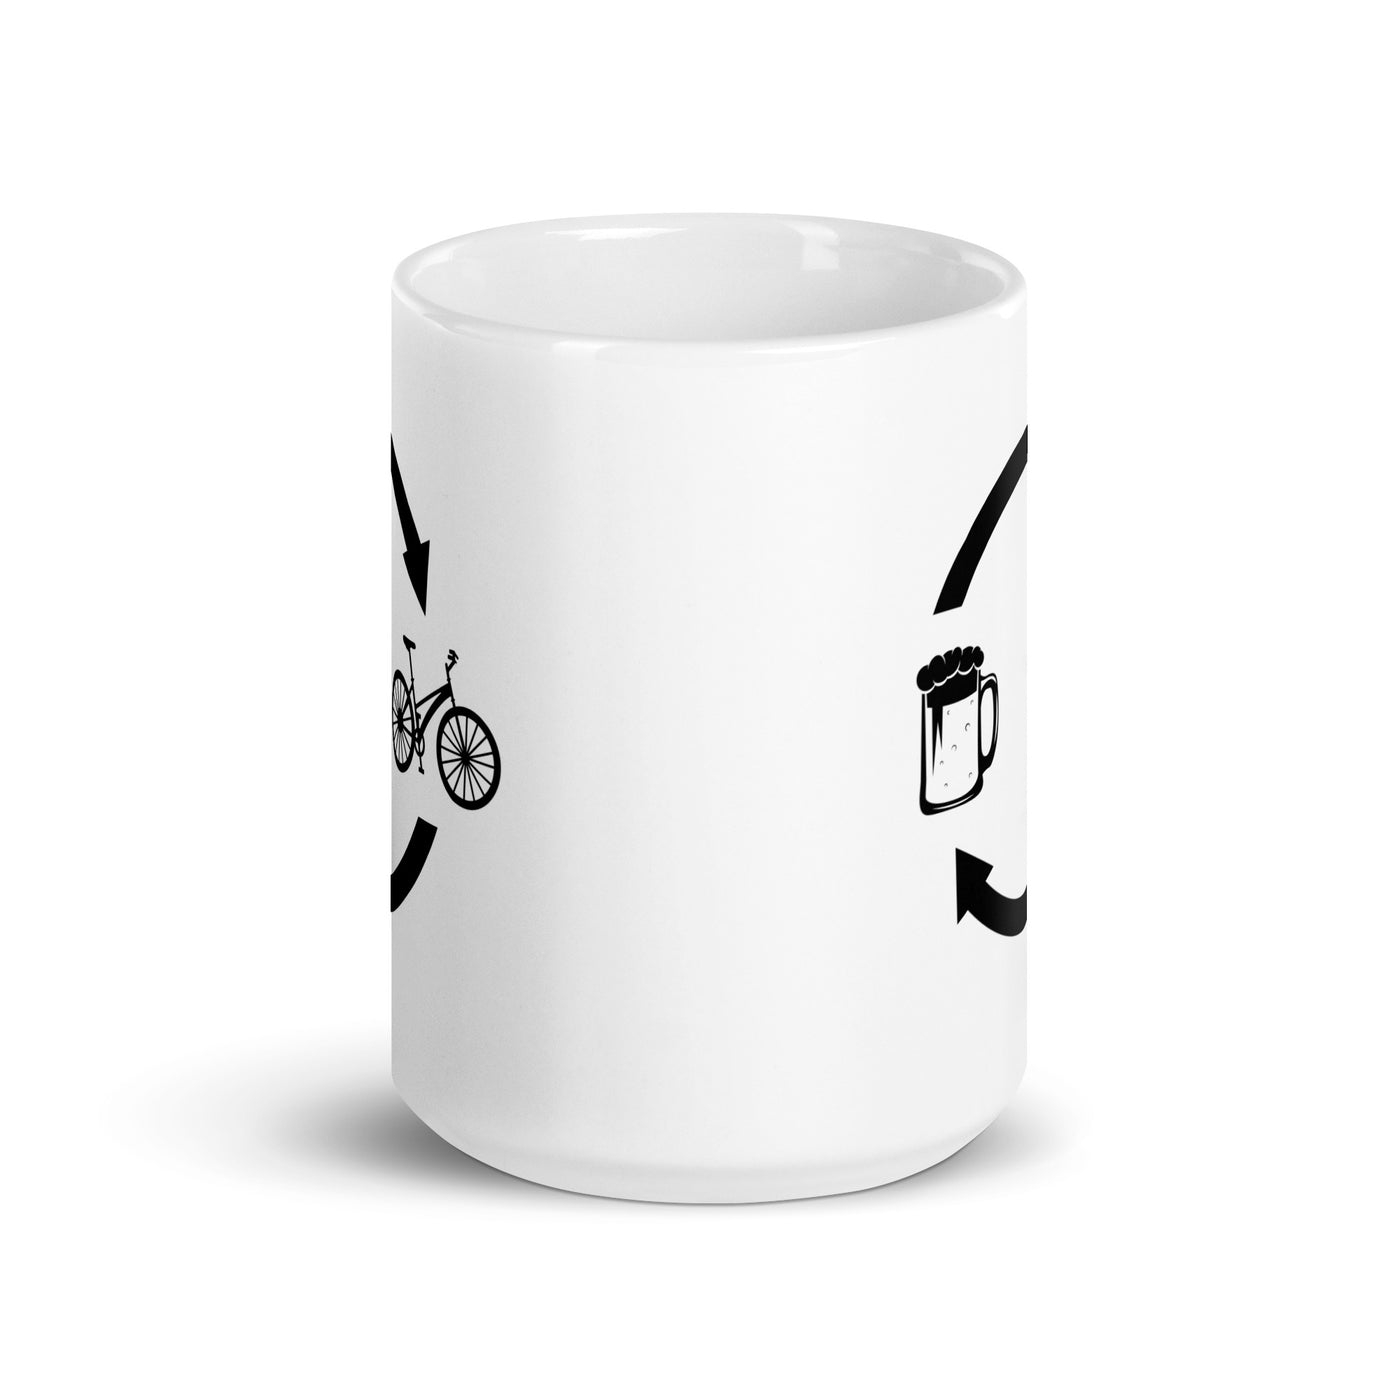 Beer Loading Arrows And Cycling - Tasse fahrrad